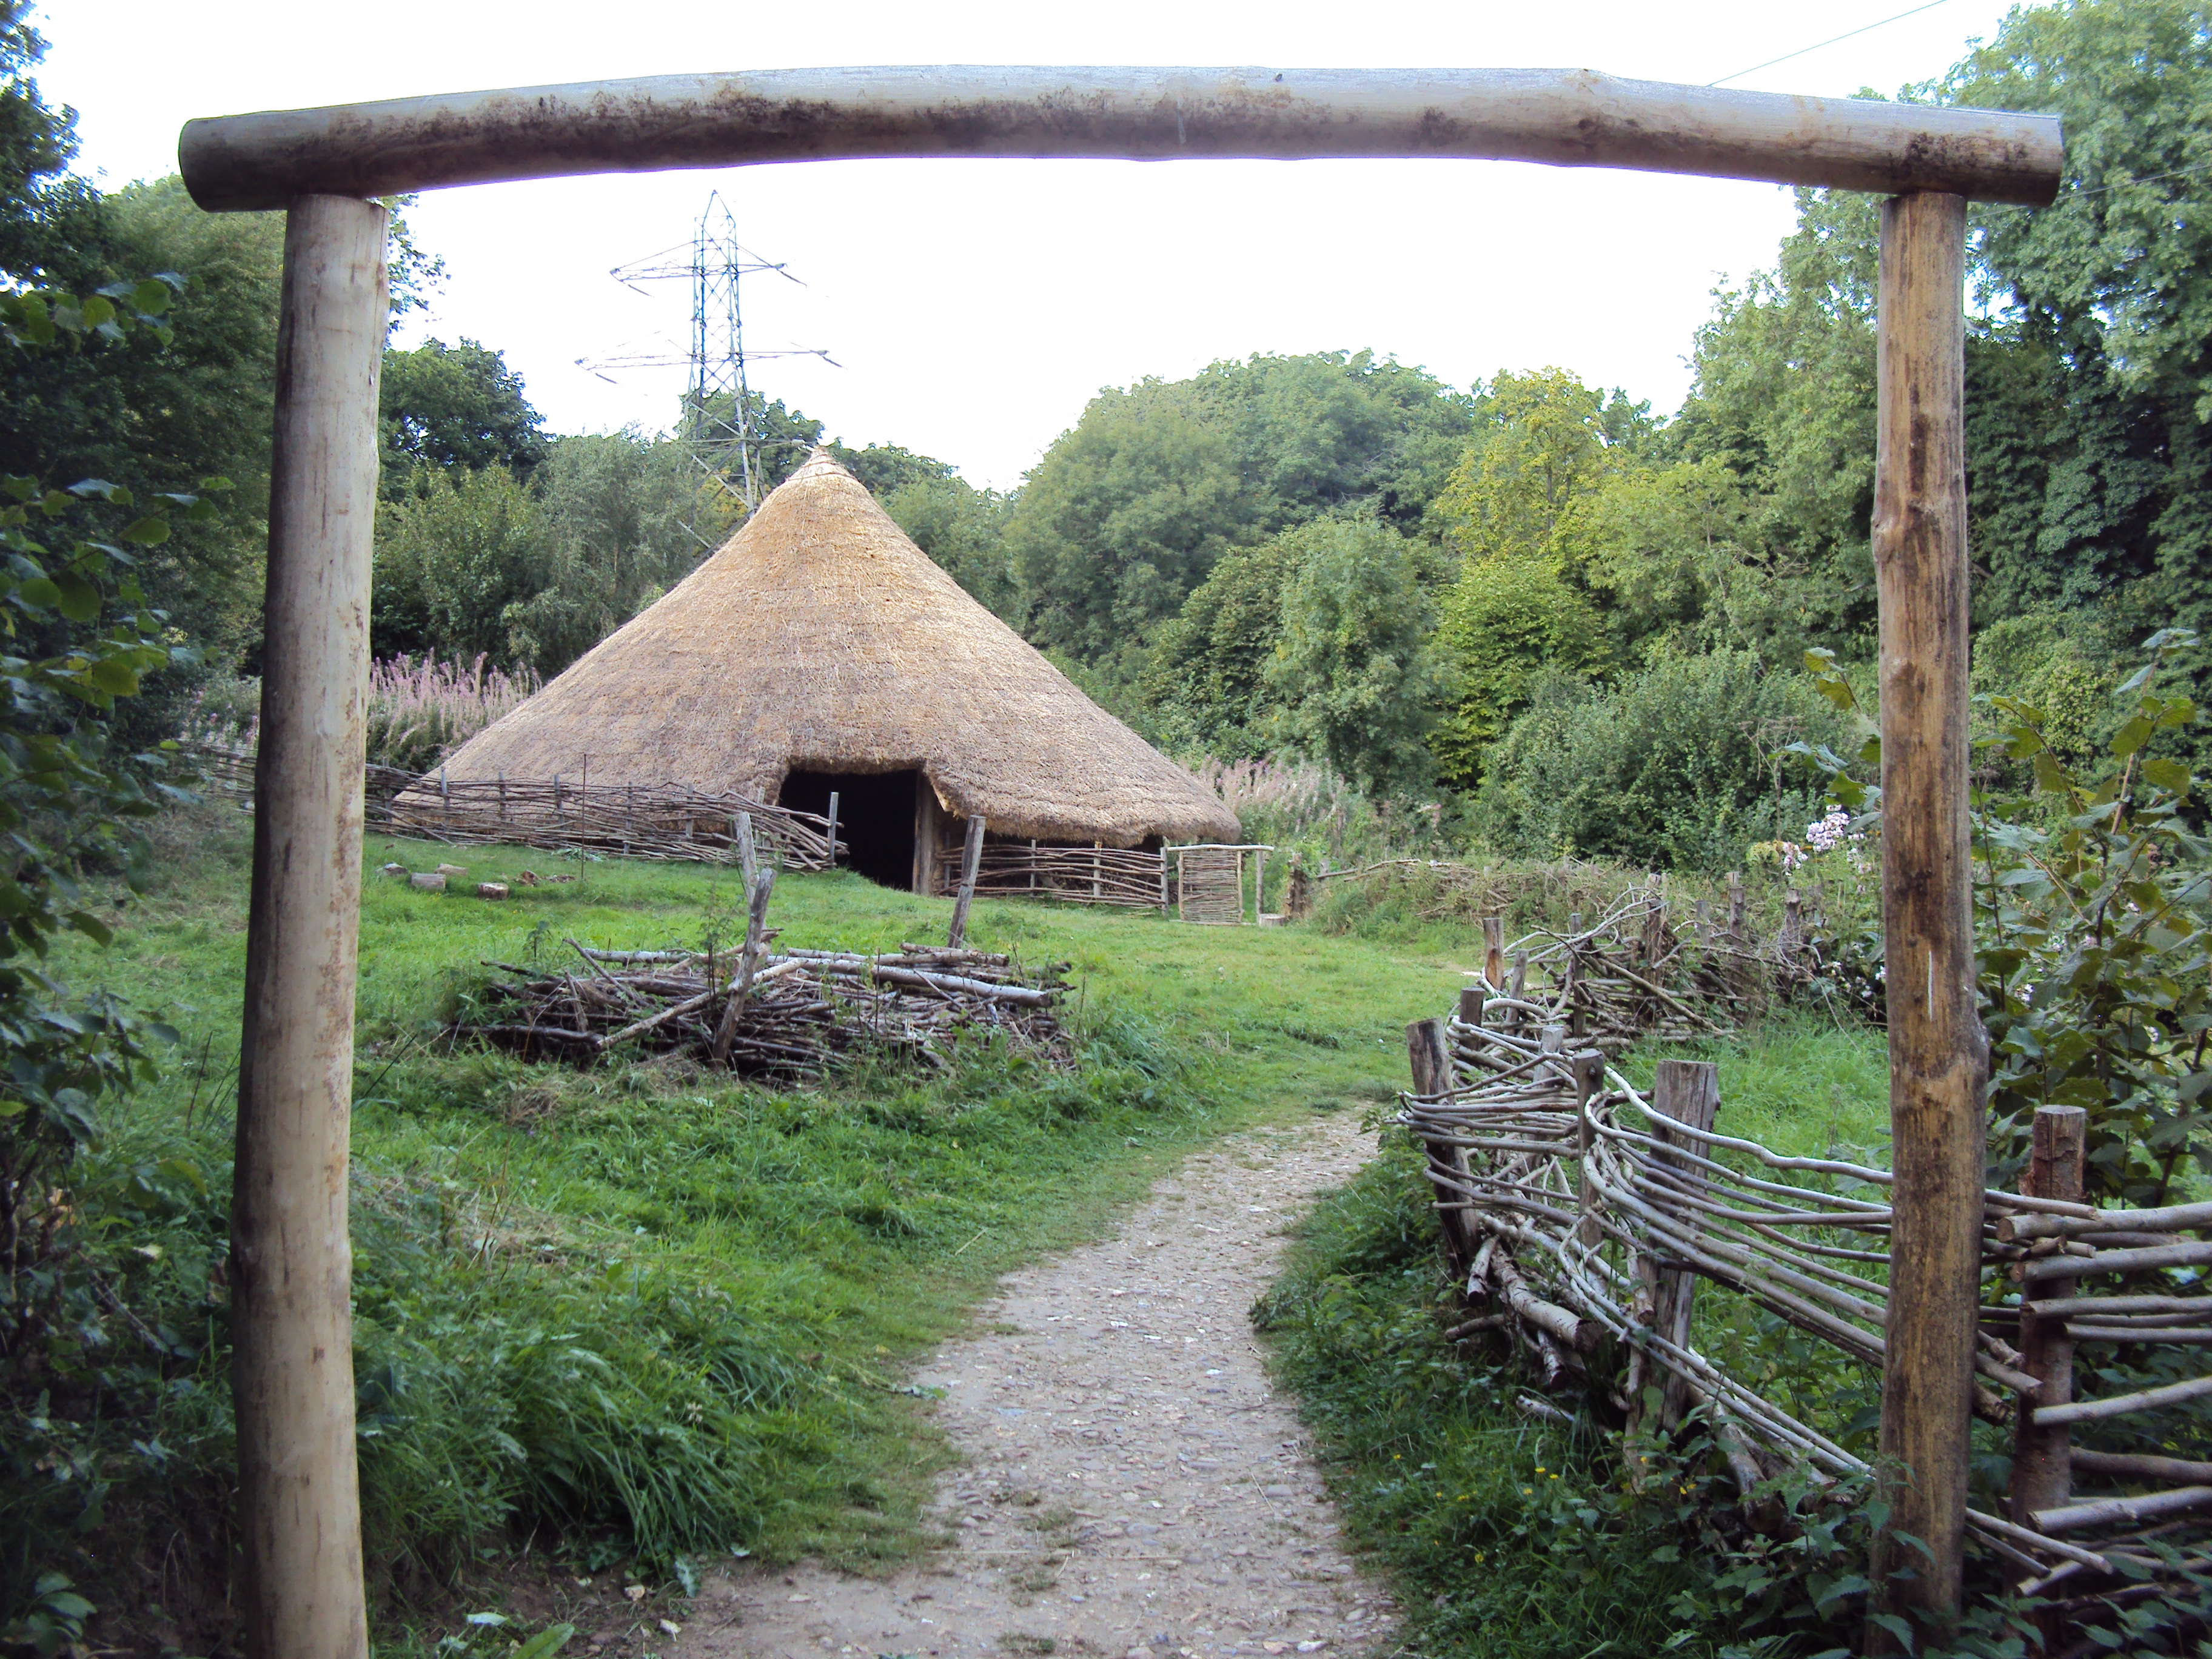 Replica Iron Age roundhouse at the Chiltern Open Air Museum